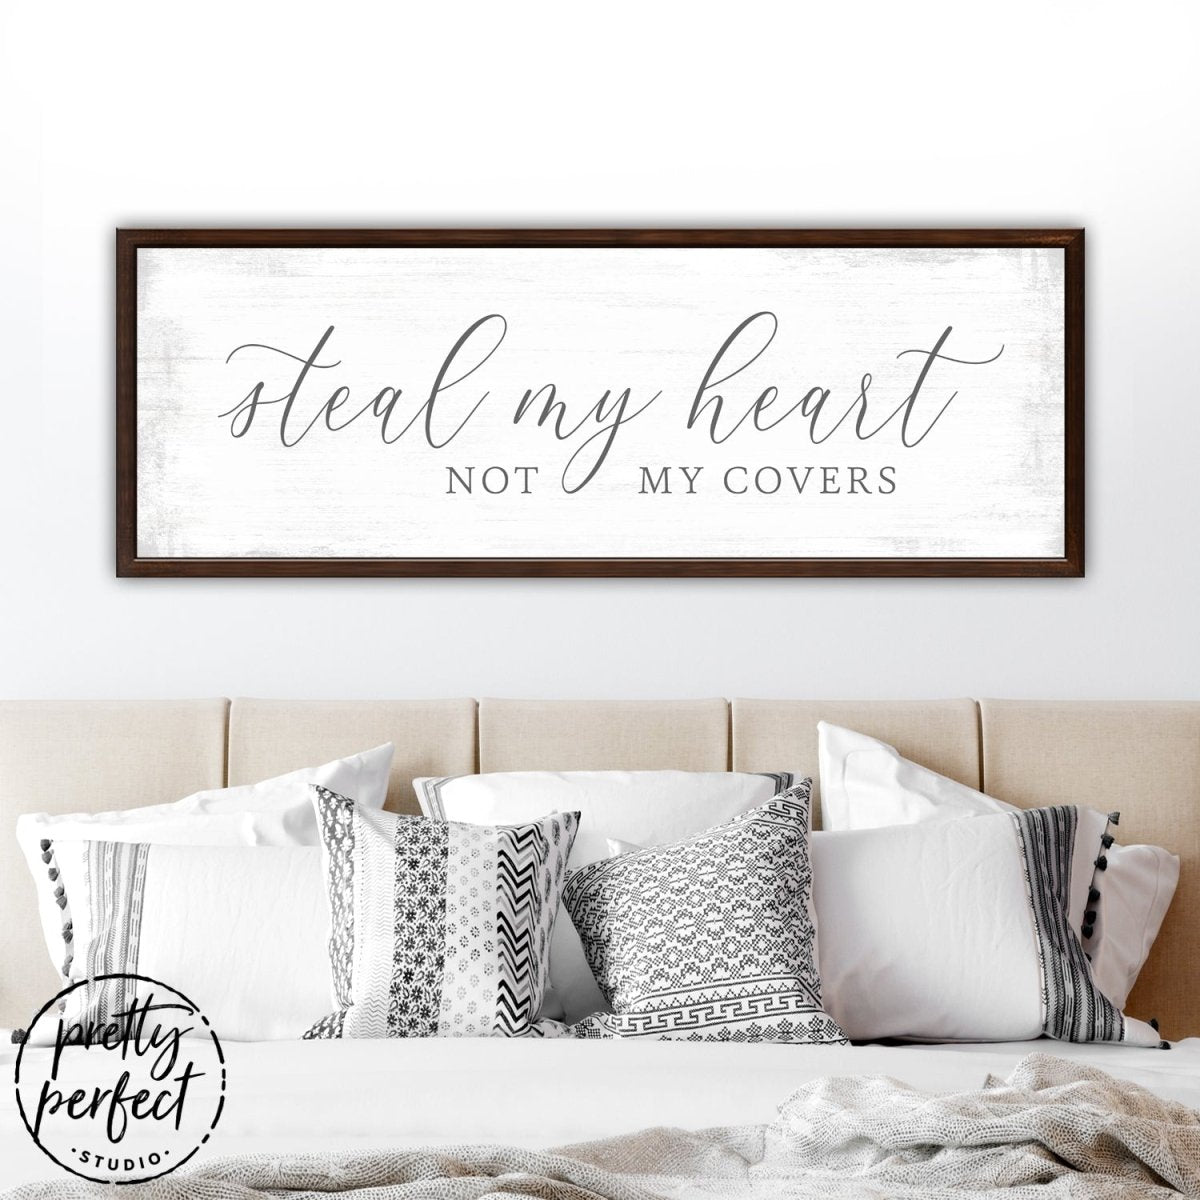 Steal My Heart Not My Covers Sign Above Bed - Pretty Perfect Studio